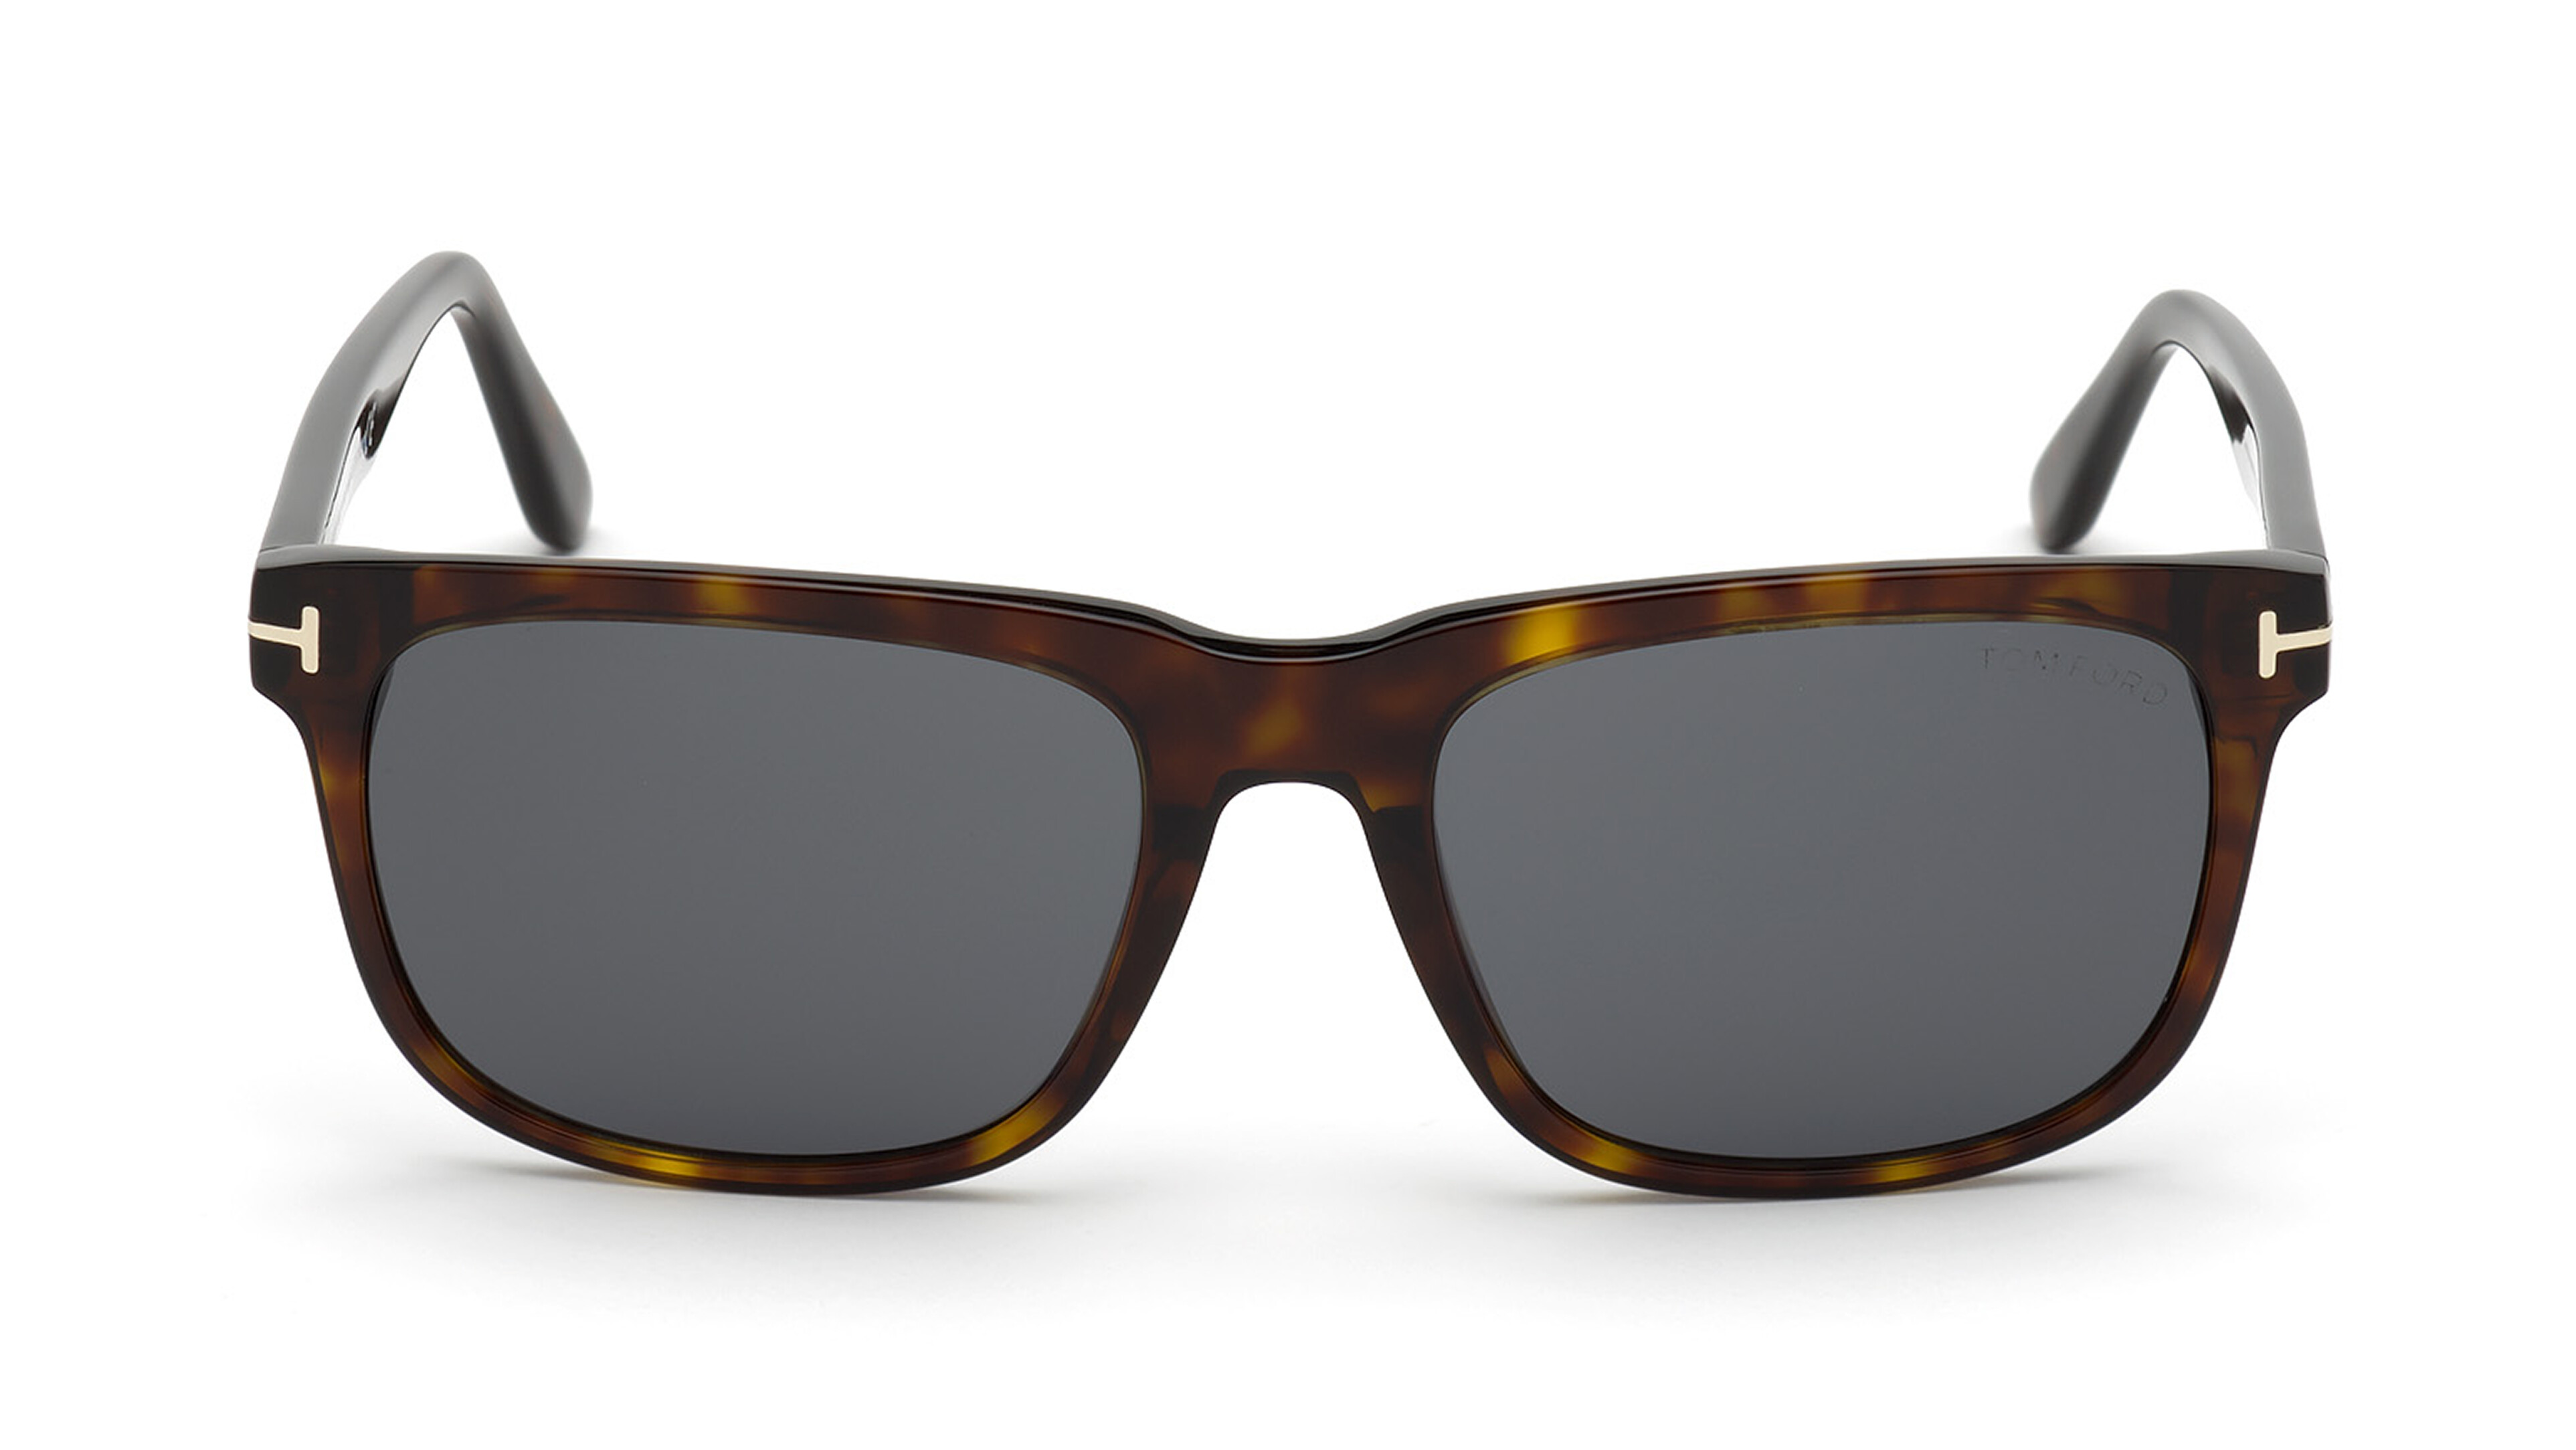 [products.image.front] Tom Ford FT0775 52A Sonnenbrille